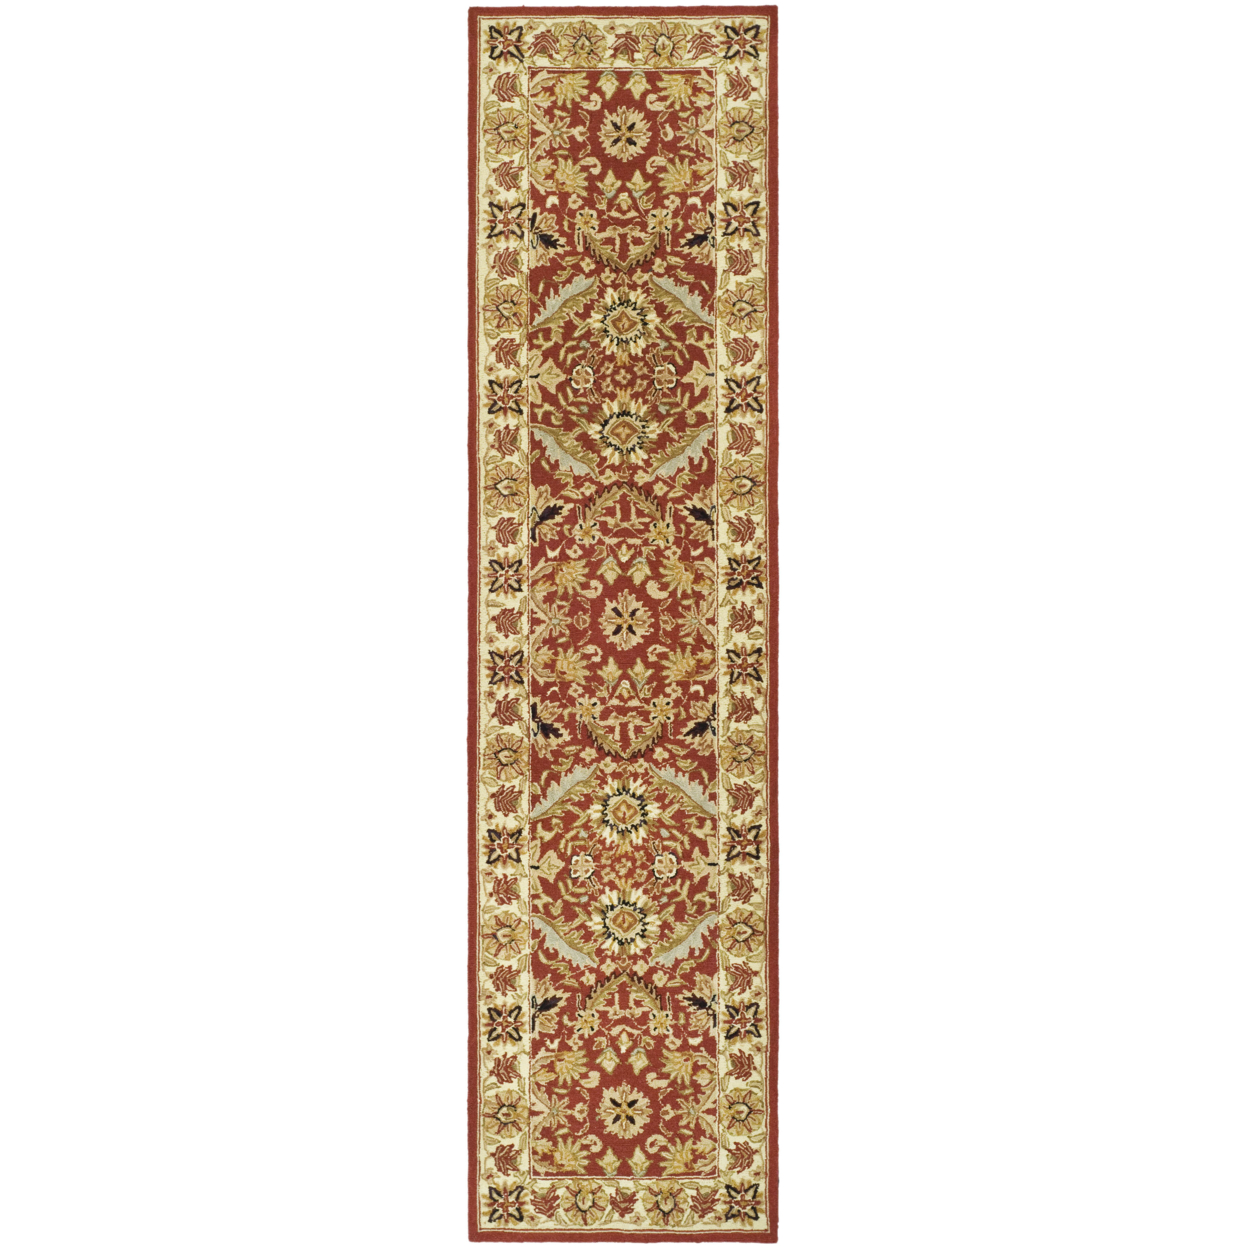 SAFAVIEH Chelsea HK157A Hand-hooked Red / Ivory Rug - 2' 6 X 10'